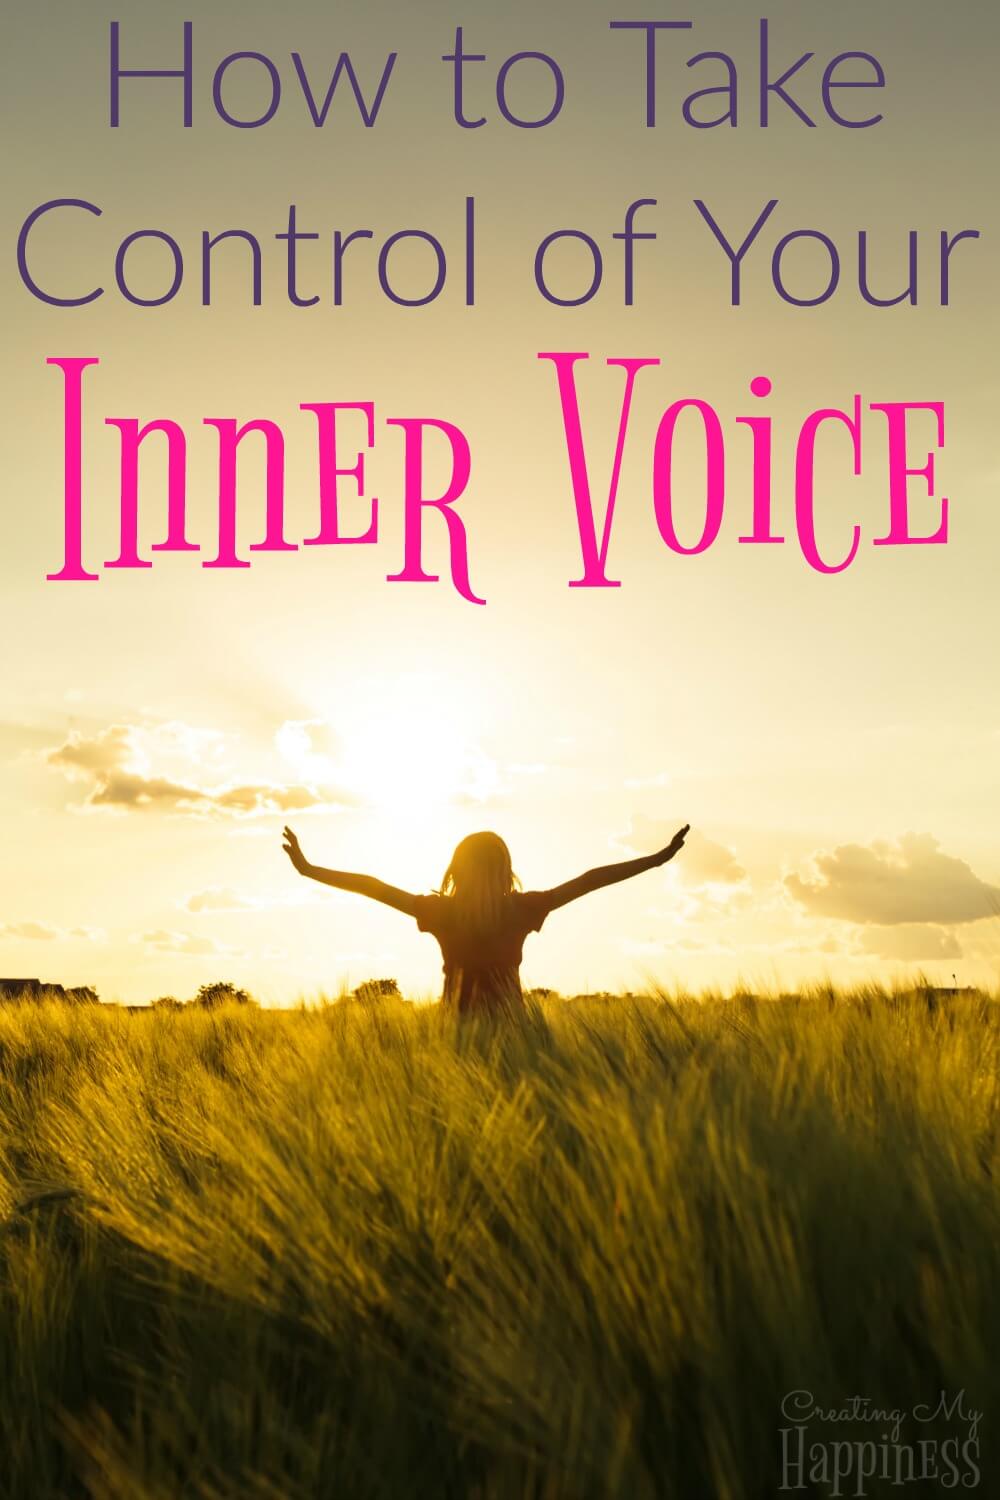 In a world full of noise, I was having a hard time keeping a positive outlook and my inner voice was turning into a negative Nelly. I found that 4 simple changes have helped keep me grounded and stop the noise from taking over my inner voice.